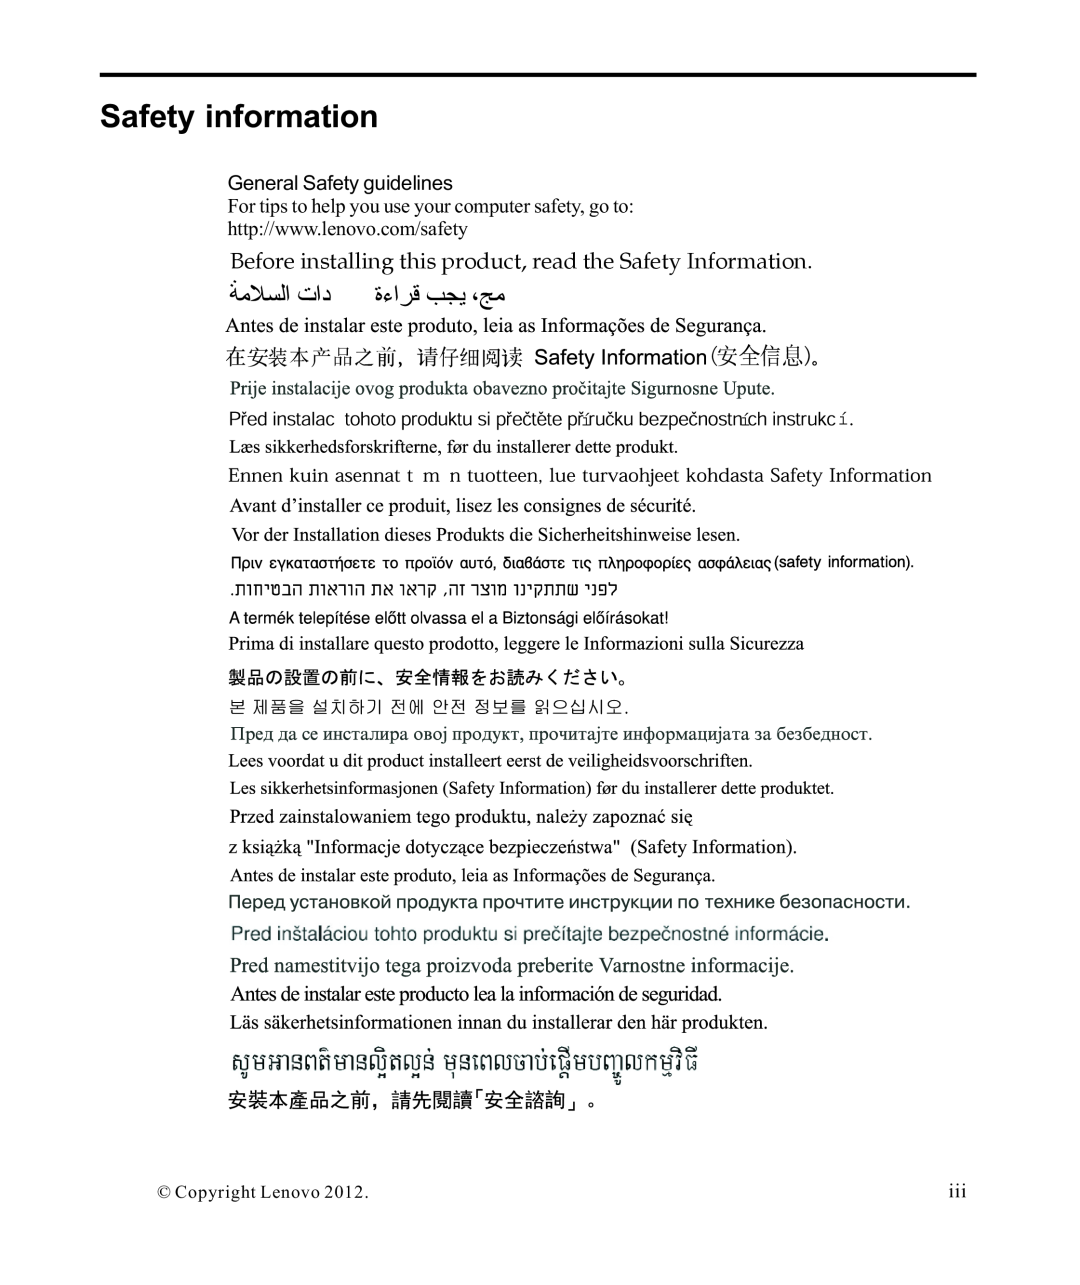 Lenovo 3028LB2 Safety information, Before installing this product, read the Safety Information, General Safety guidelines 